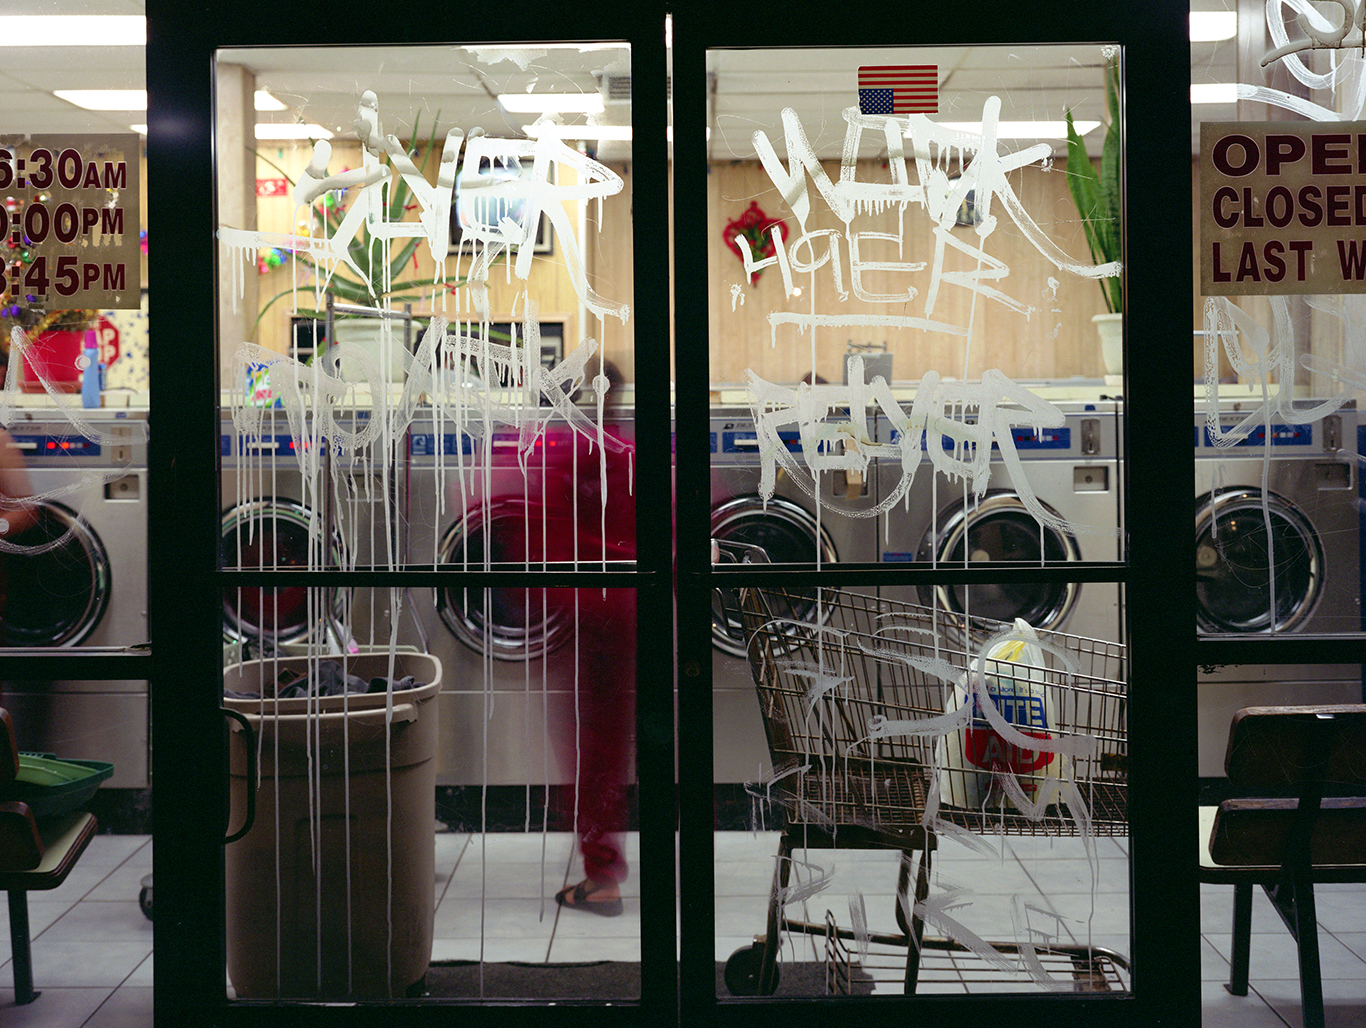 Image of glass doors to a laundromat with grafiti covering the glass